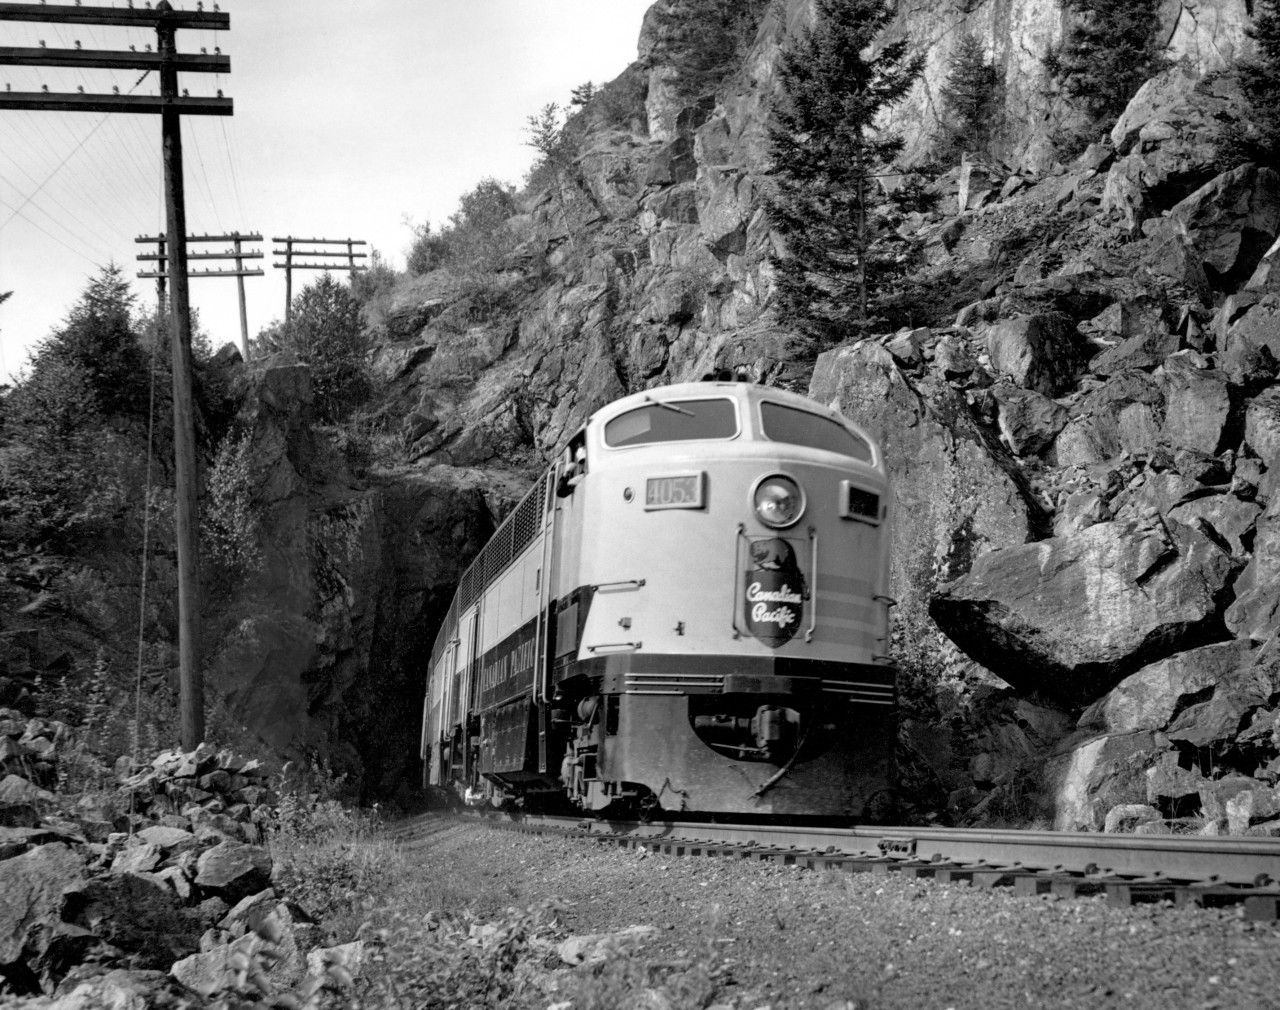 Kettle Valley train 12 with engine 4053 at Harrison tunnels, west of Aggasiz